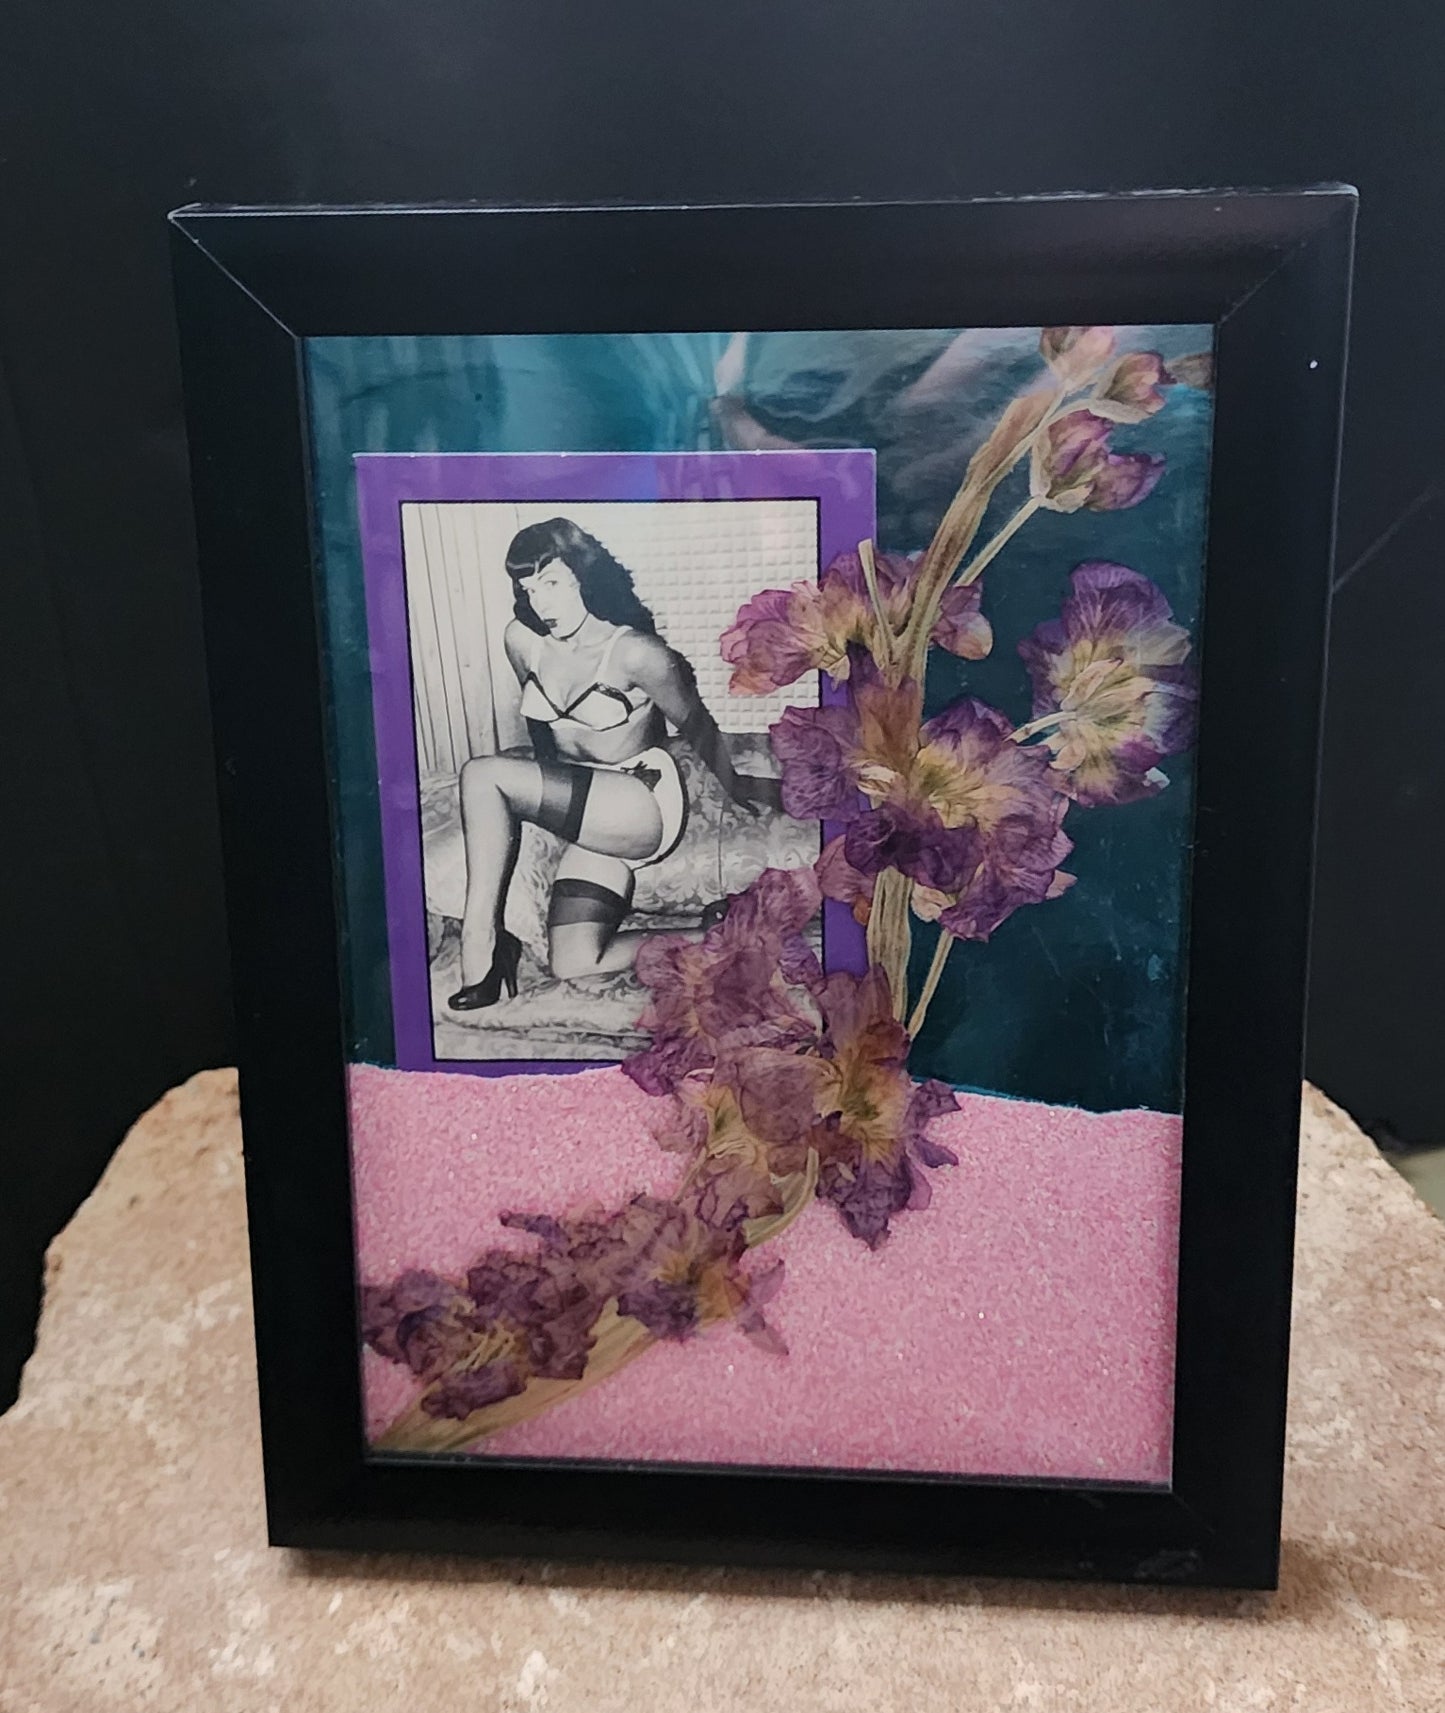 Framed Vintage Bettie Page Trading Card & Pressed Flower Art - 5 x 7